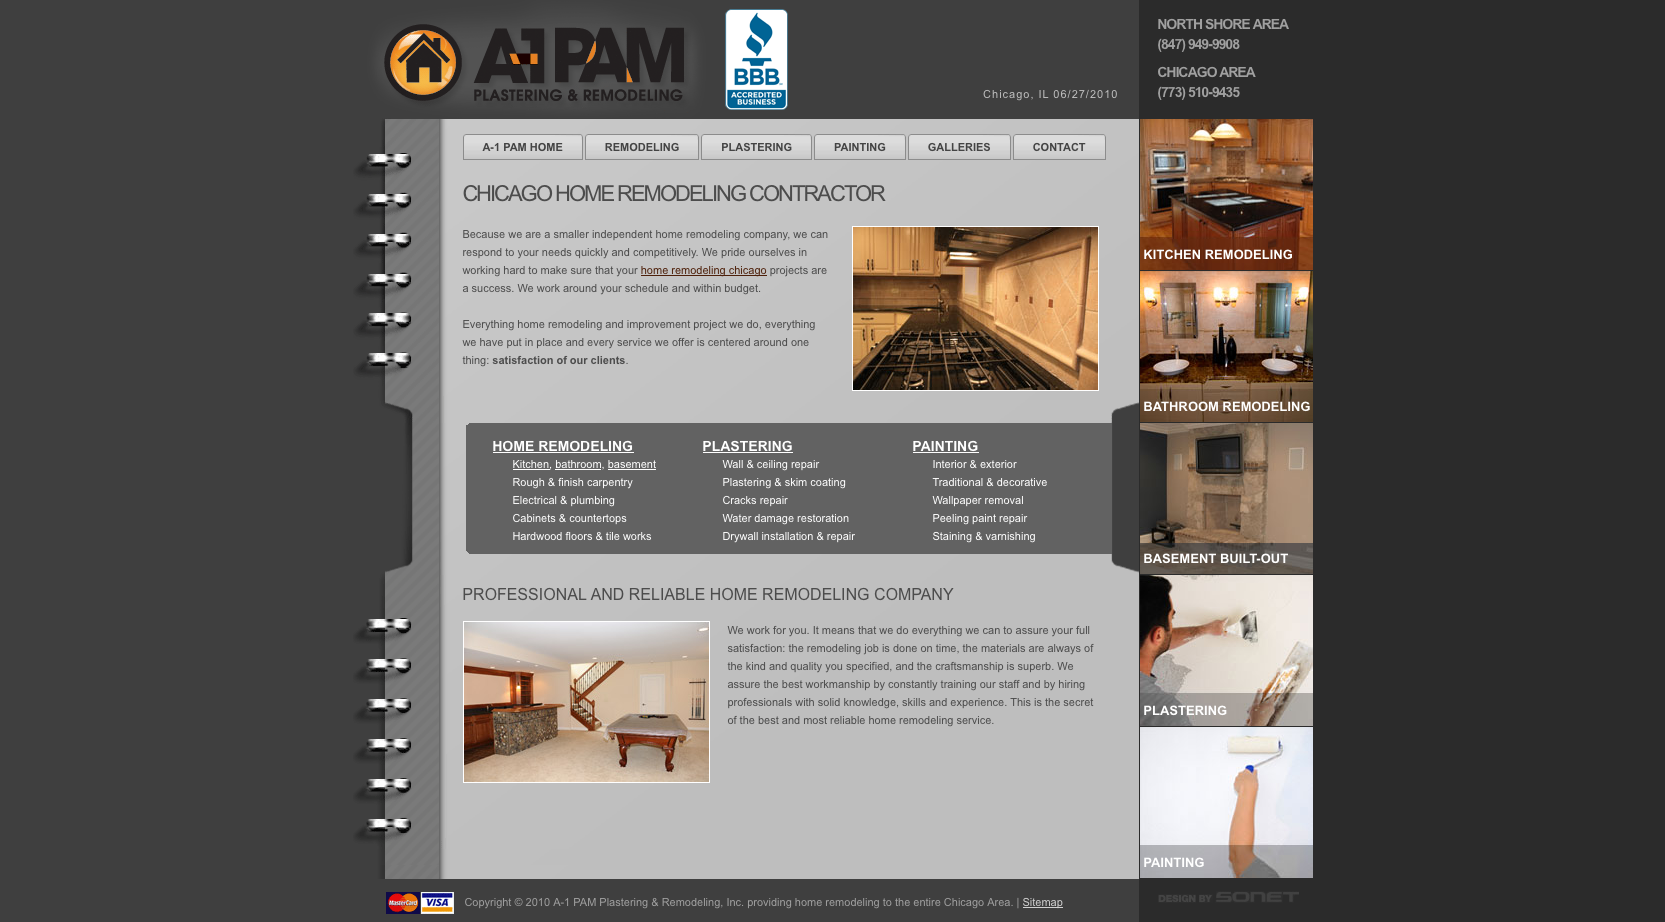 A-1 PAM Plastering & Home Remodeling (sonet)